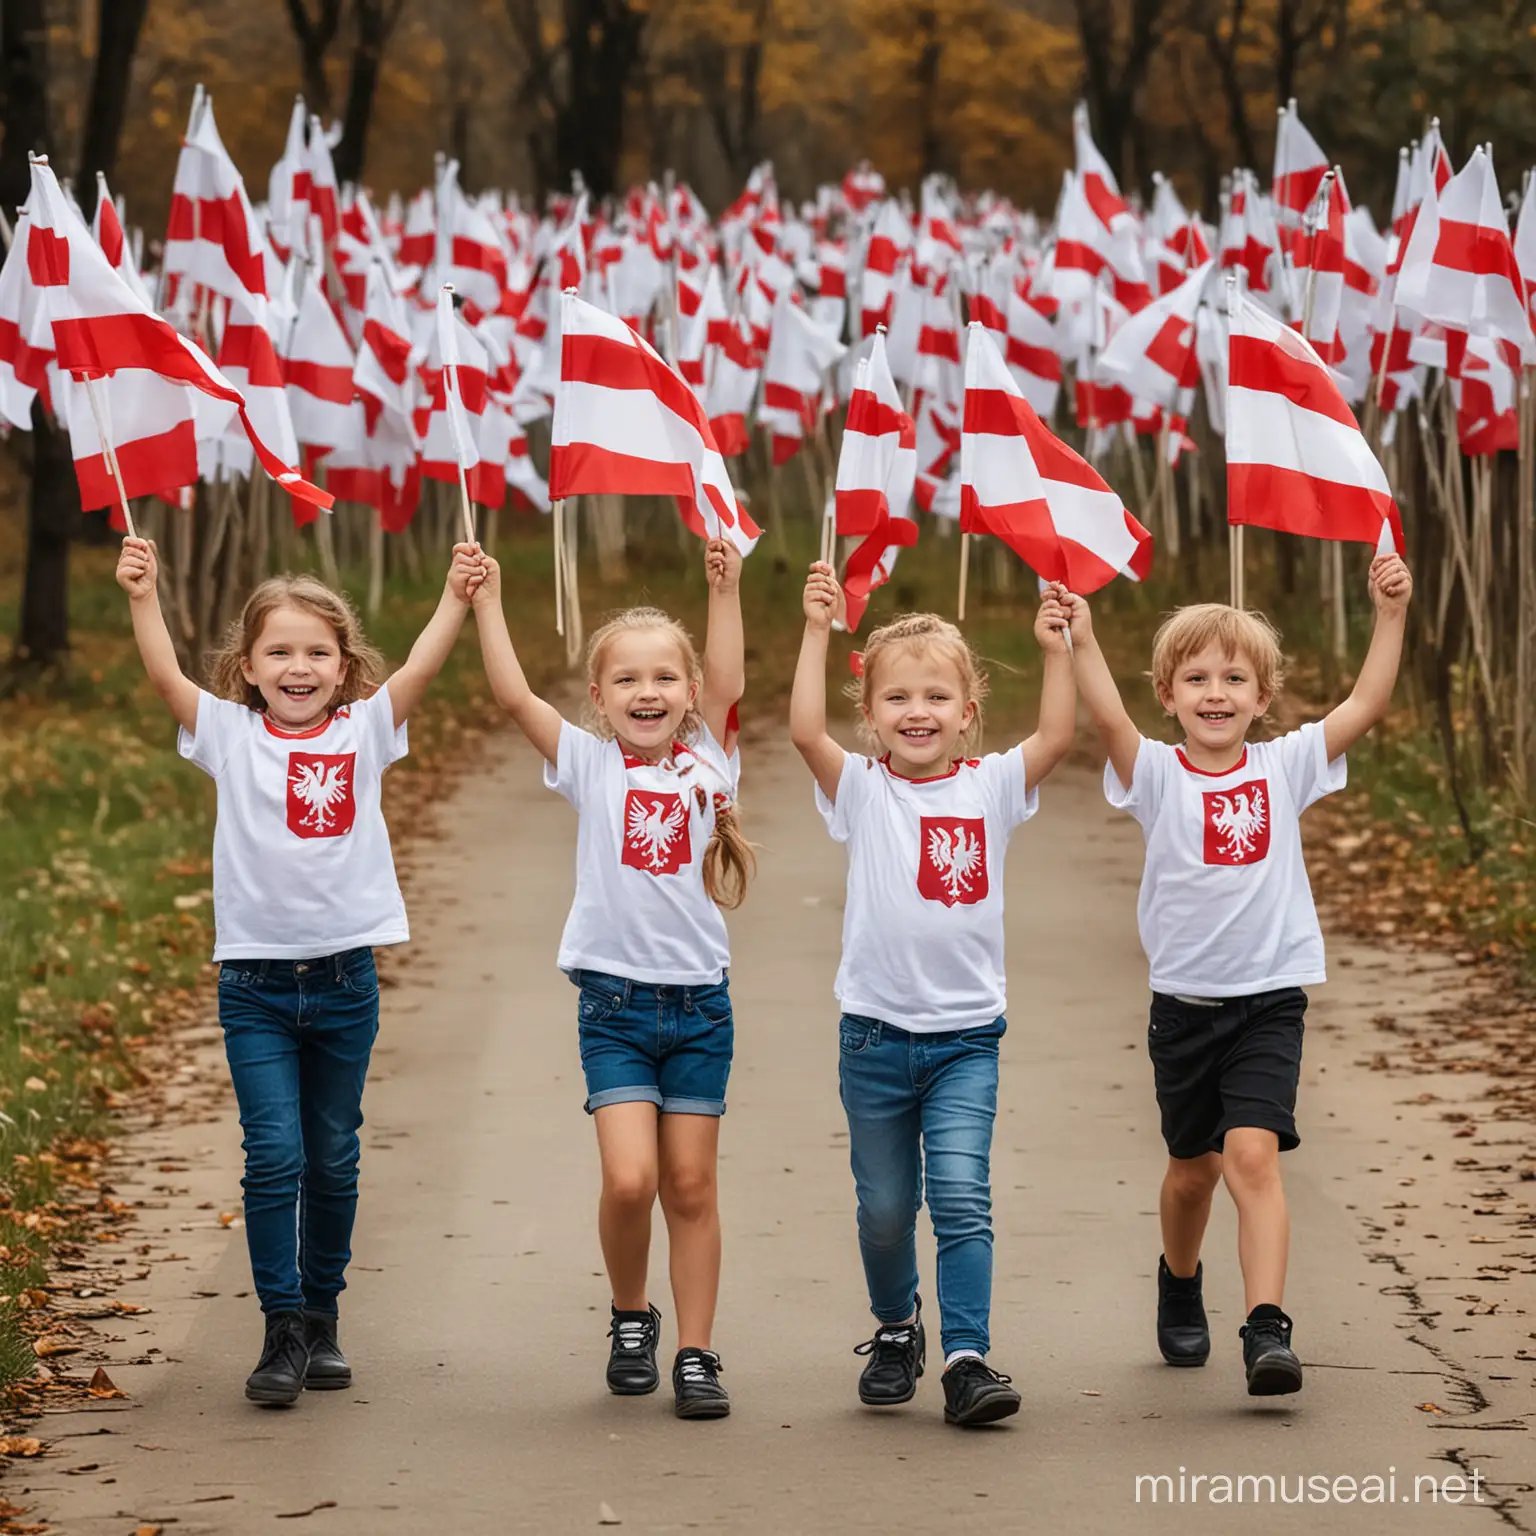 Cheerful Children Celebrating with Polish Flags